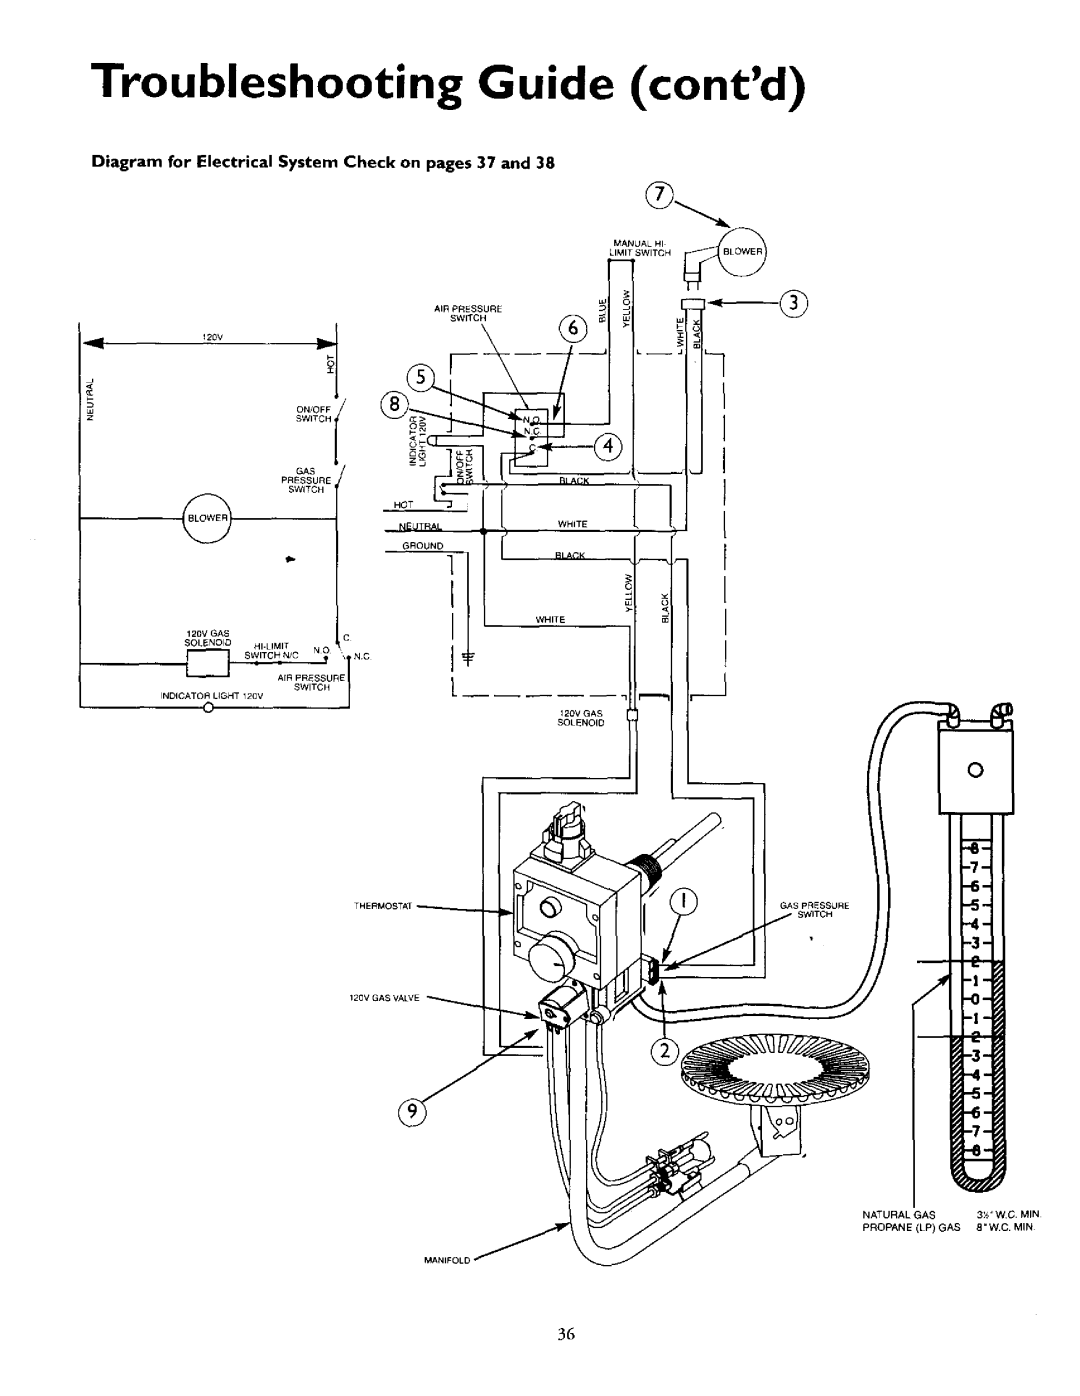 Kenmore 153.335863 Troubleshooting Guide contd, O_Nualh, Limit Switch, Air Pressure, SWlTC, On/Off, White, GROUND7, Ri A K 